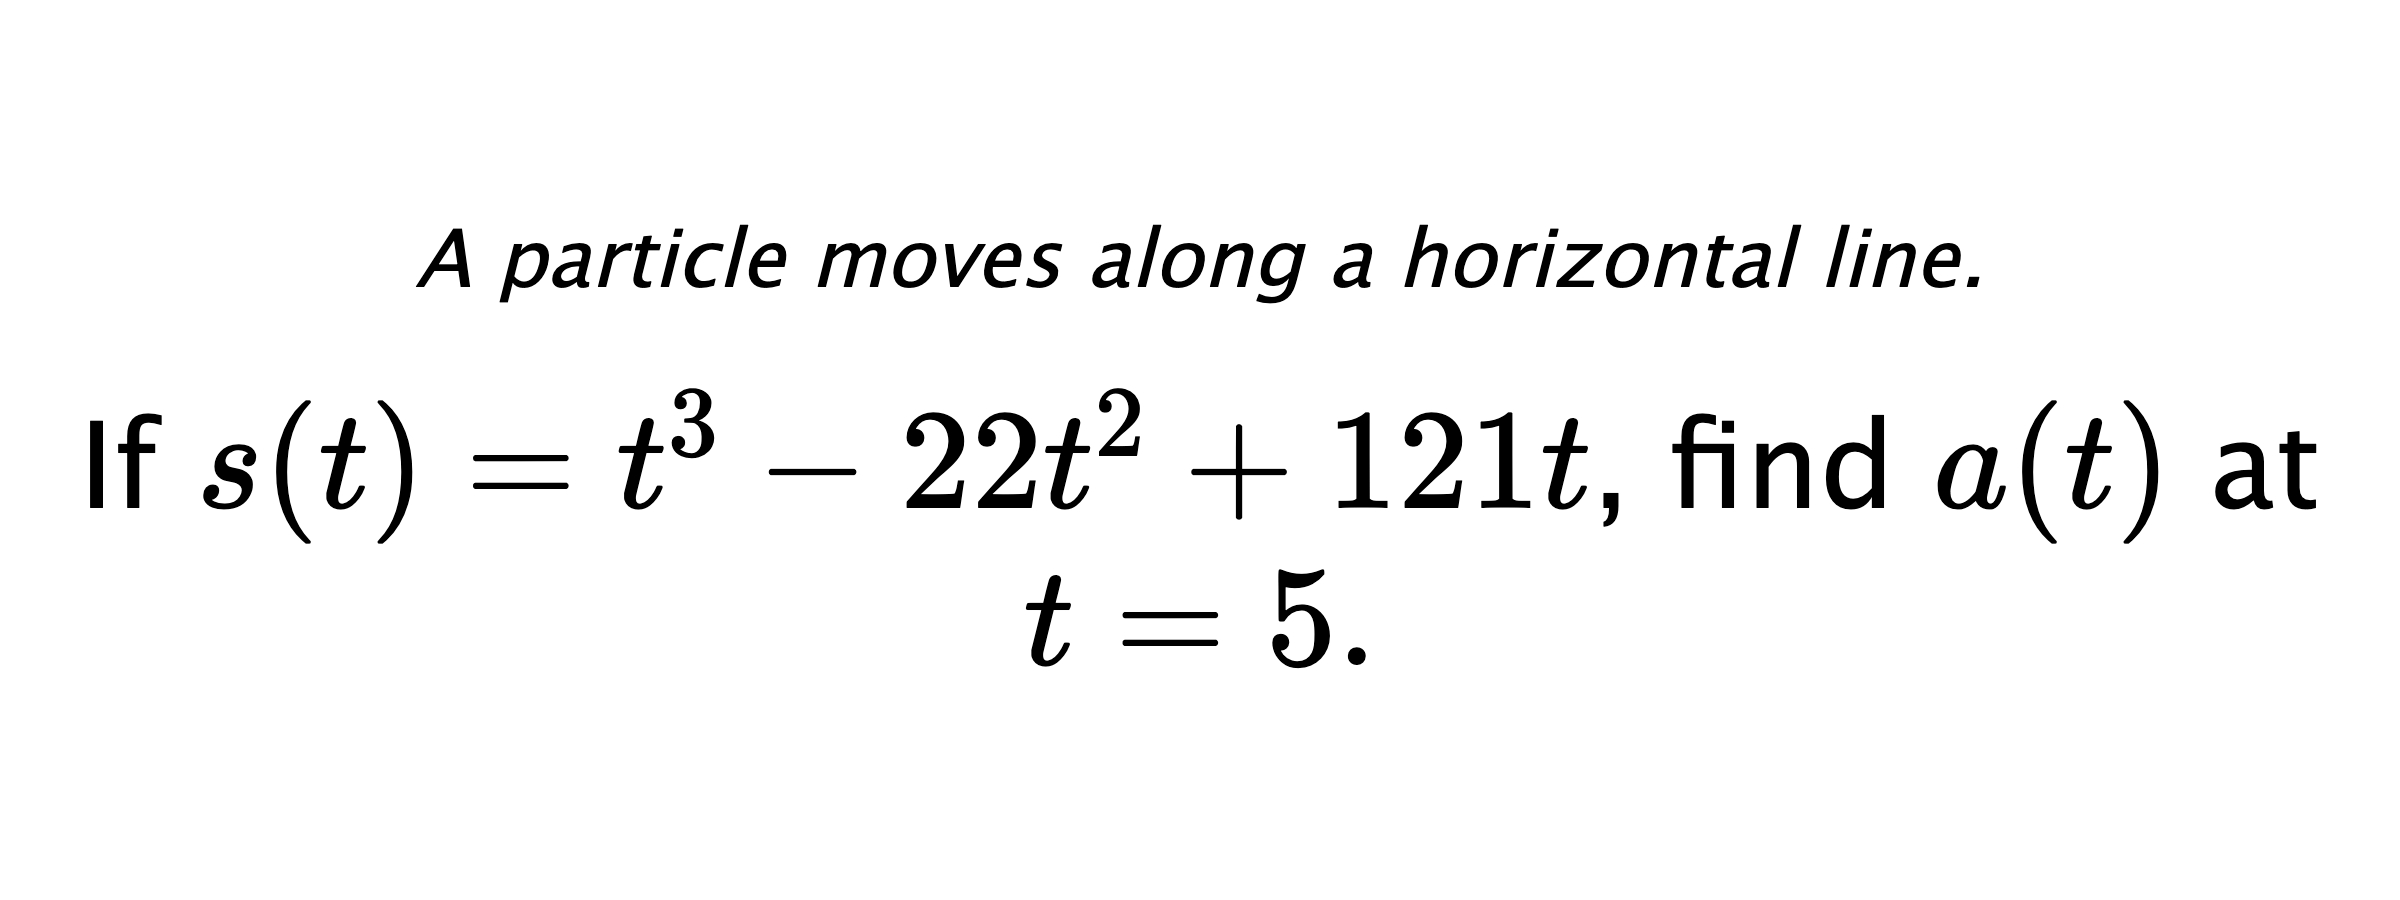 A particle moves along a horizontal line. If $ s(t)=t^3-22t^2+121t $, find $ a(t) $ at $ t=5 .$